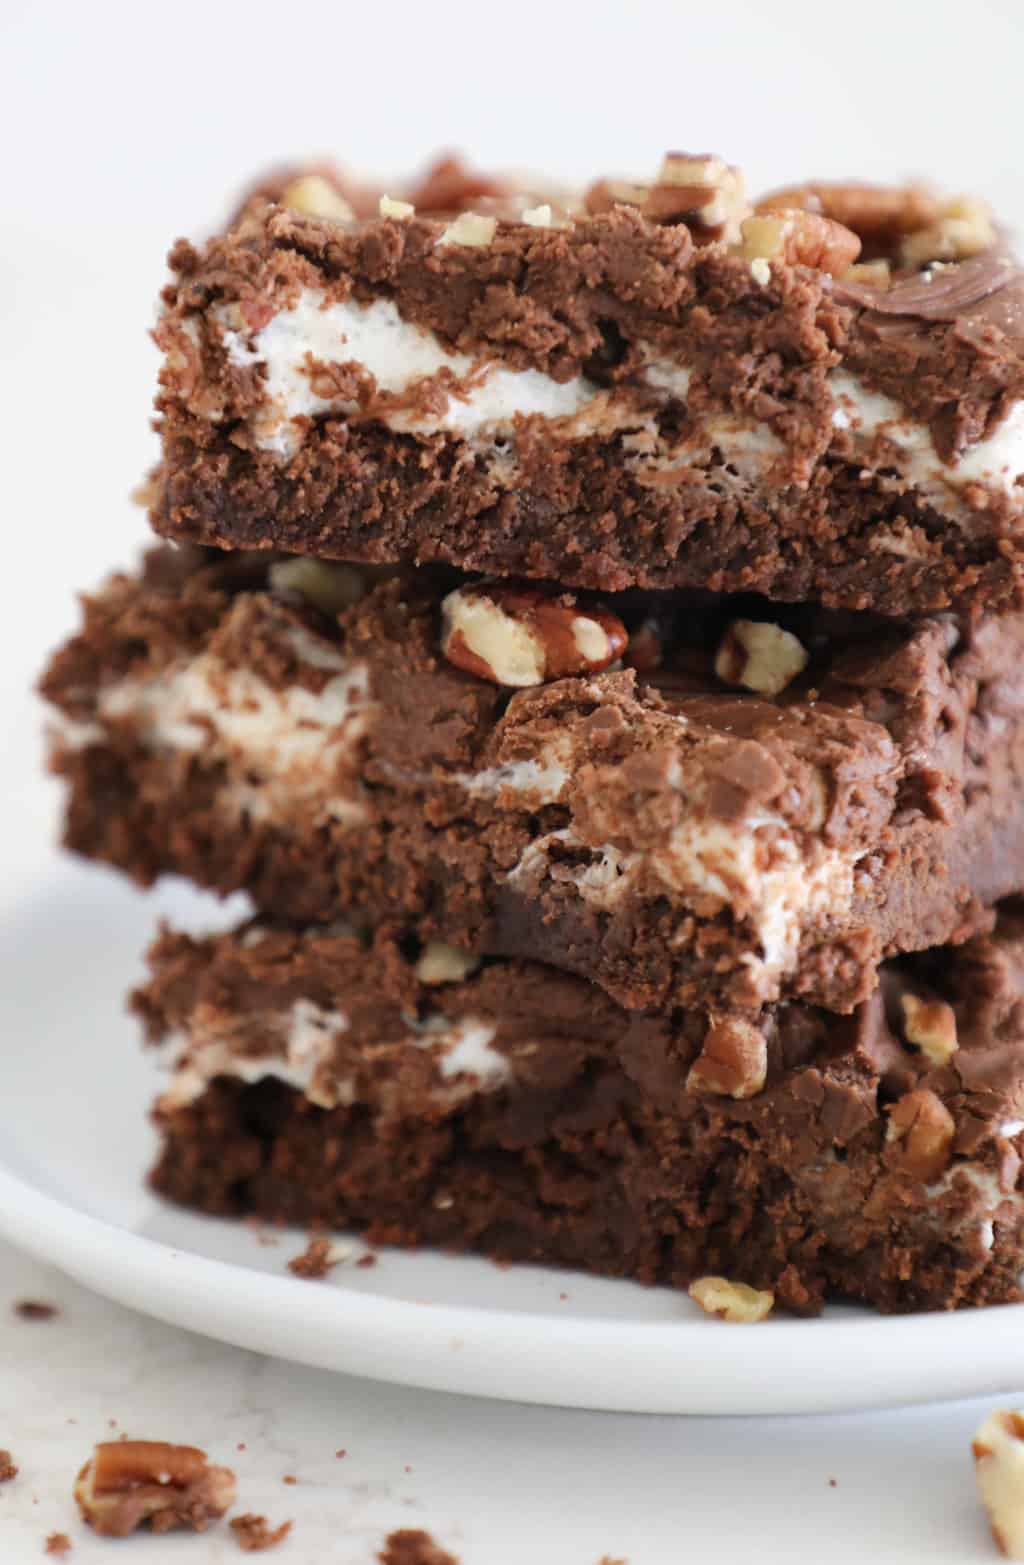 Side view of the different layers in a rocky road brownie, brownie, marshmallows, frosting and nuts.